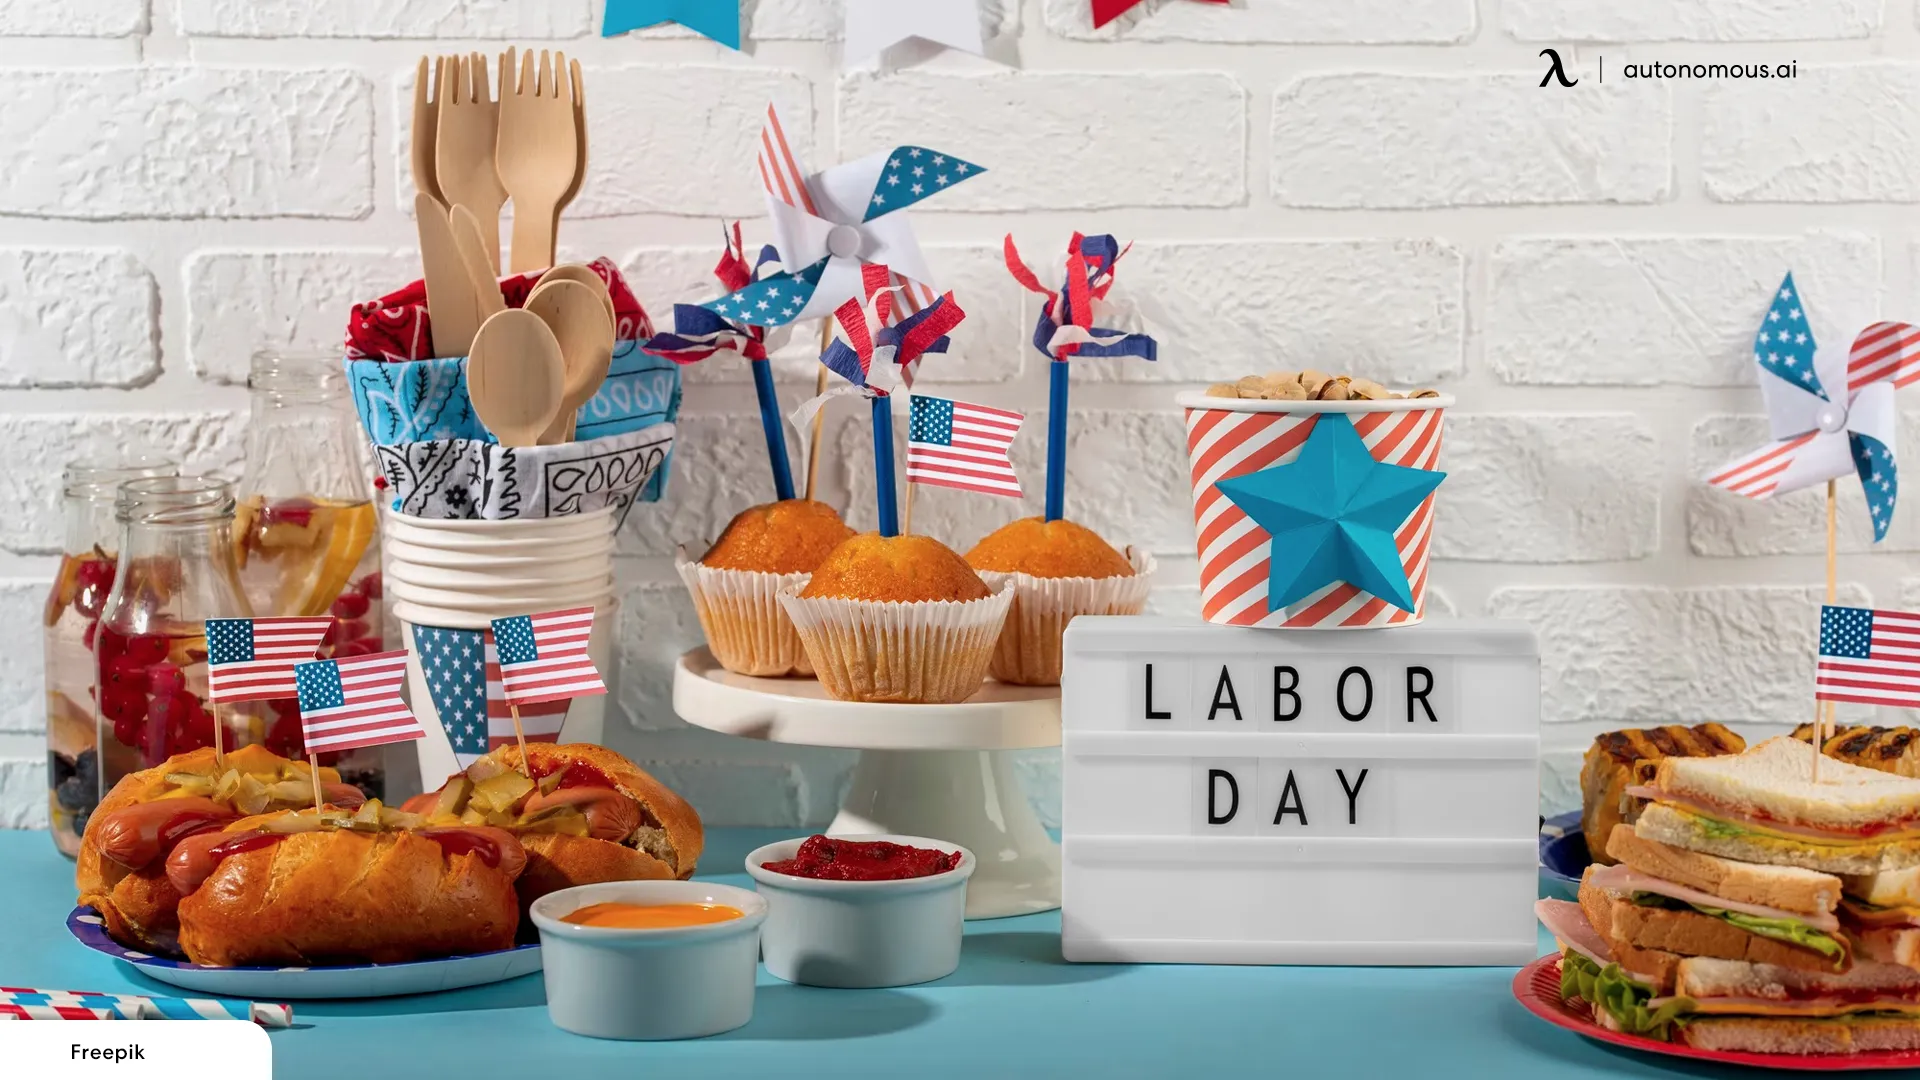 Ideas for Indoor Labor Day Decorations